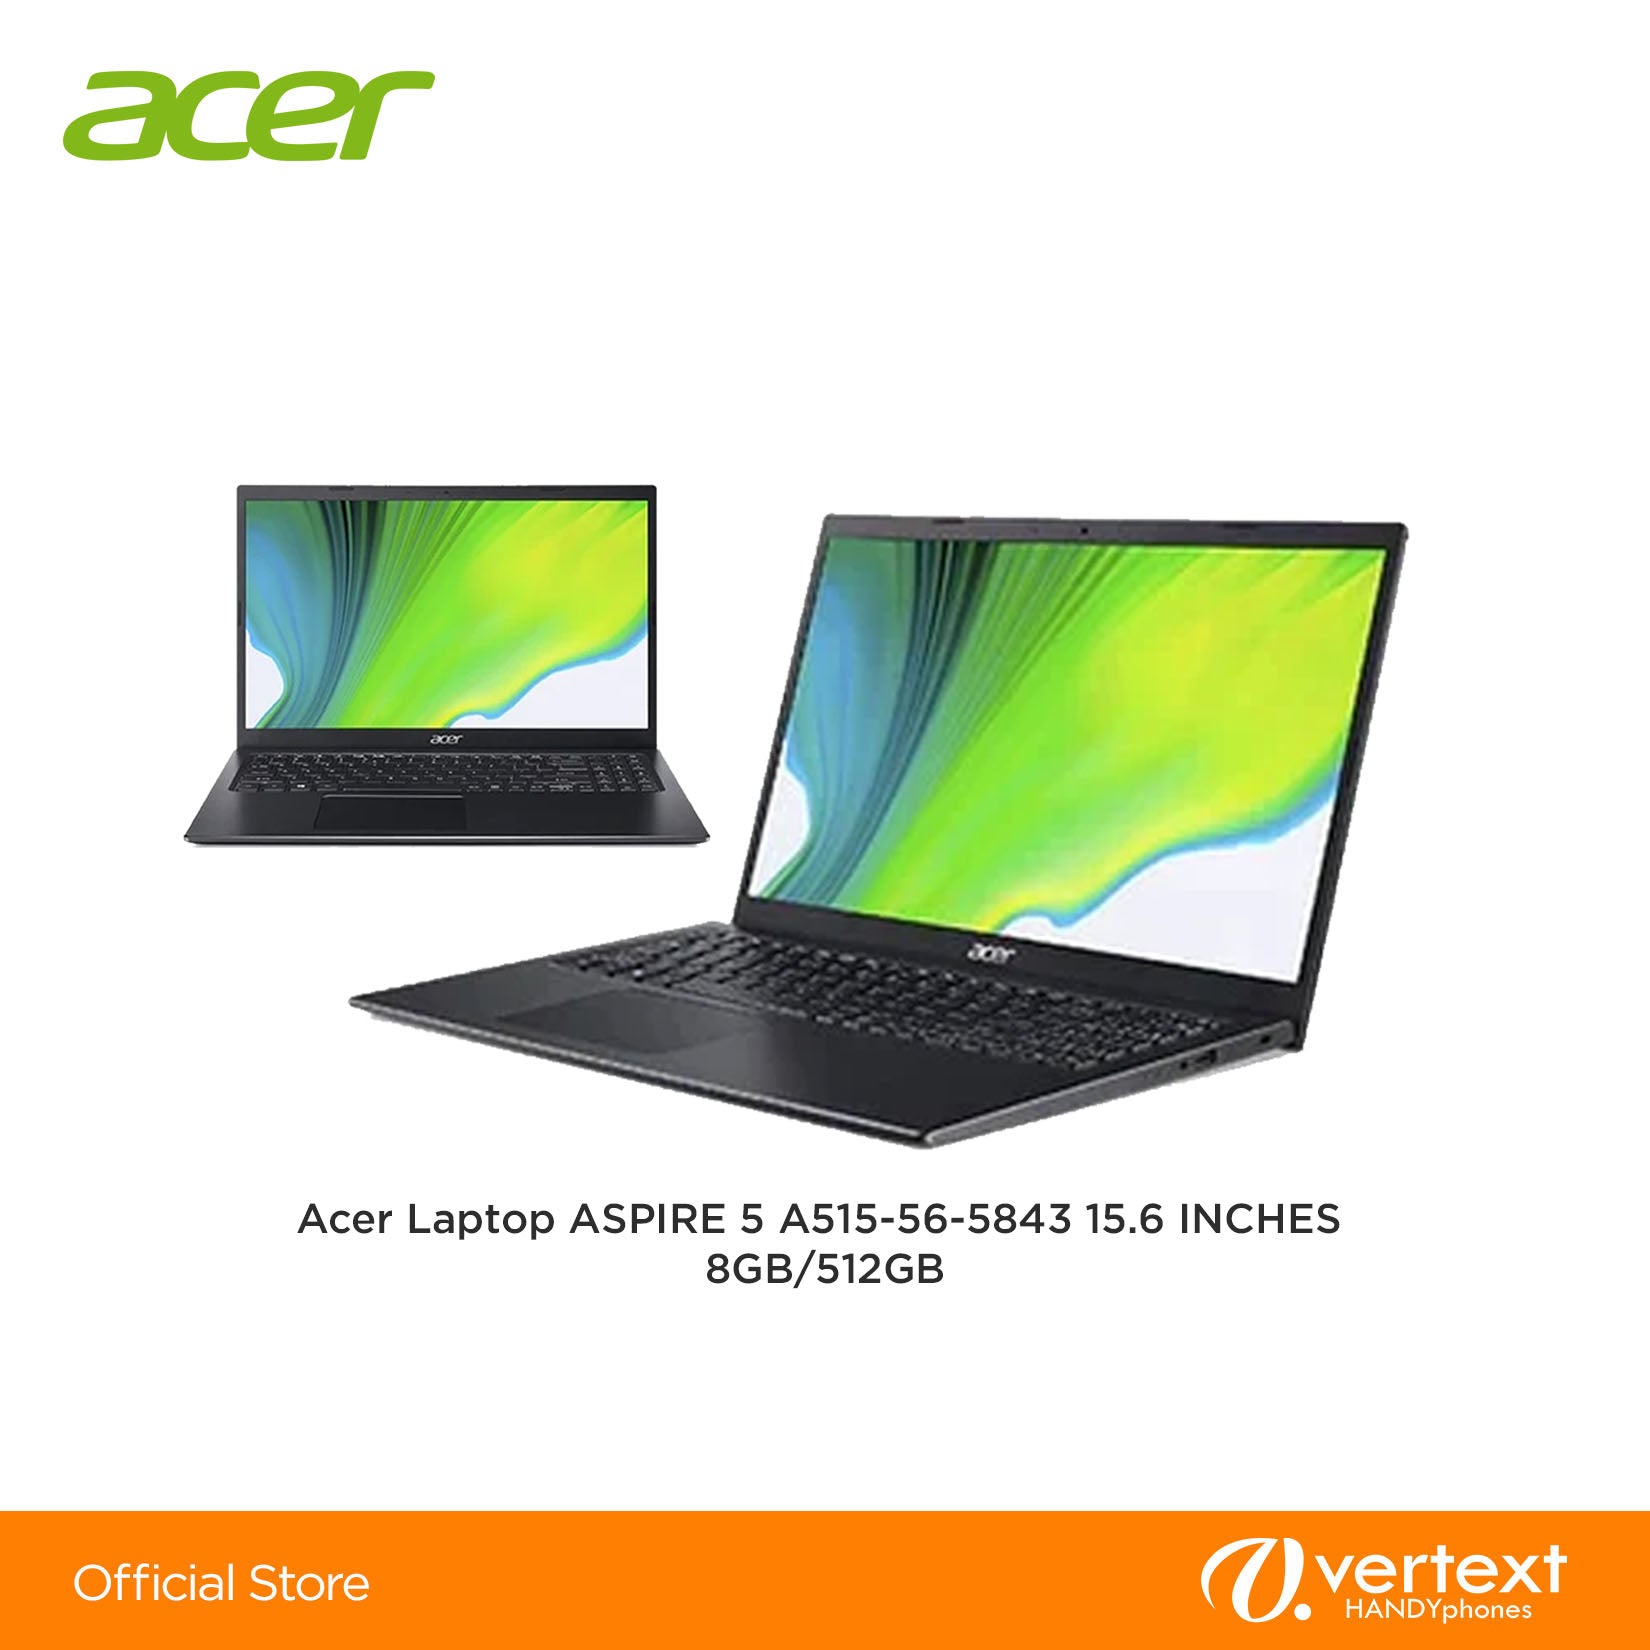 Acer Laptop ASPIRE 5 A515-56-5843 15.6 INCHES